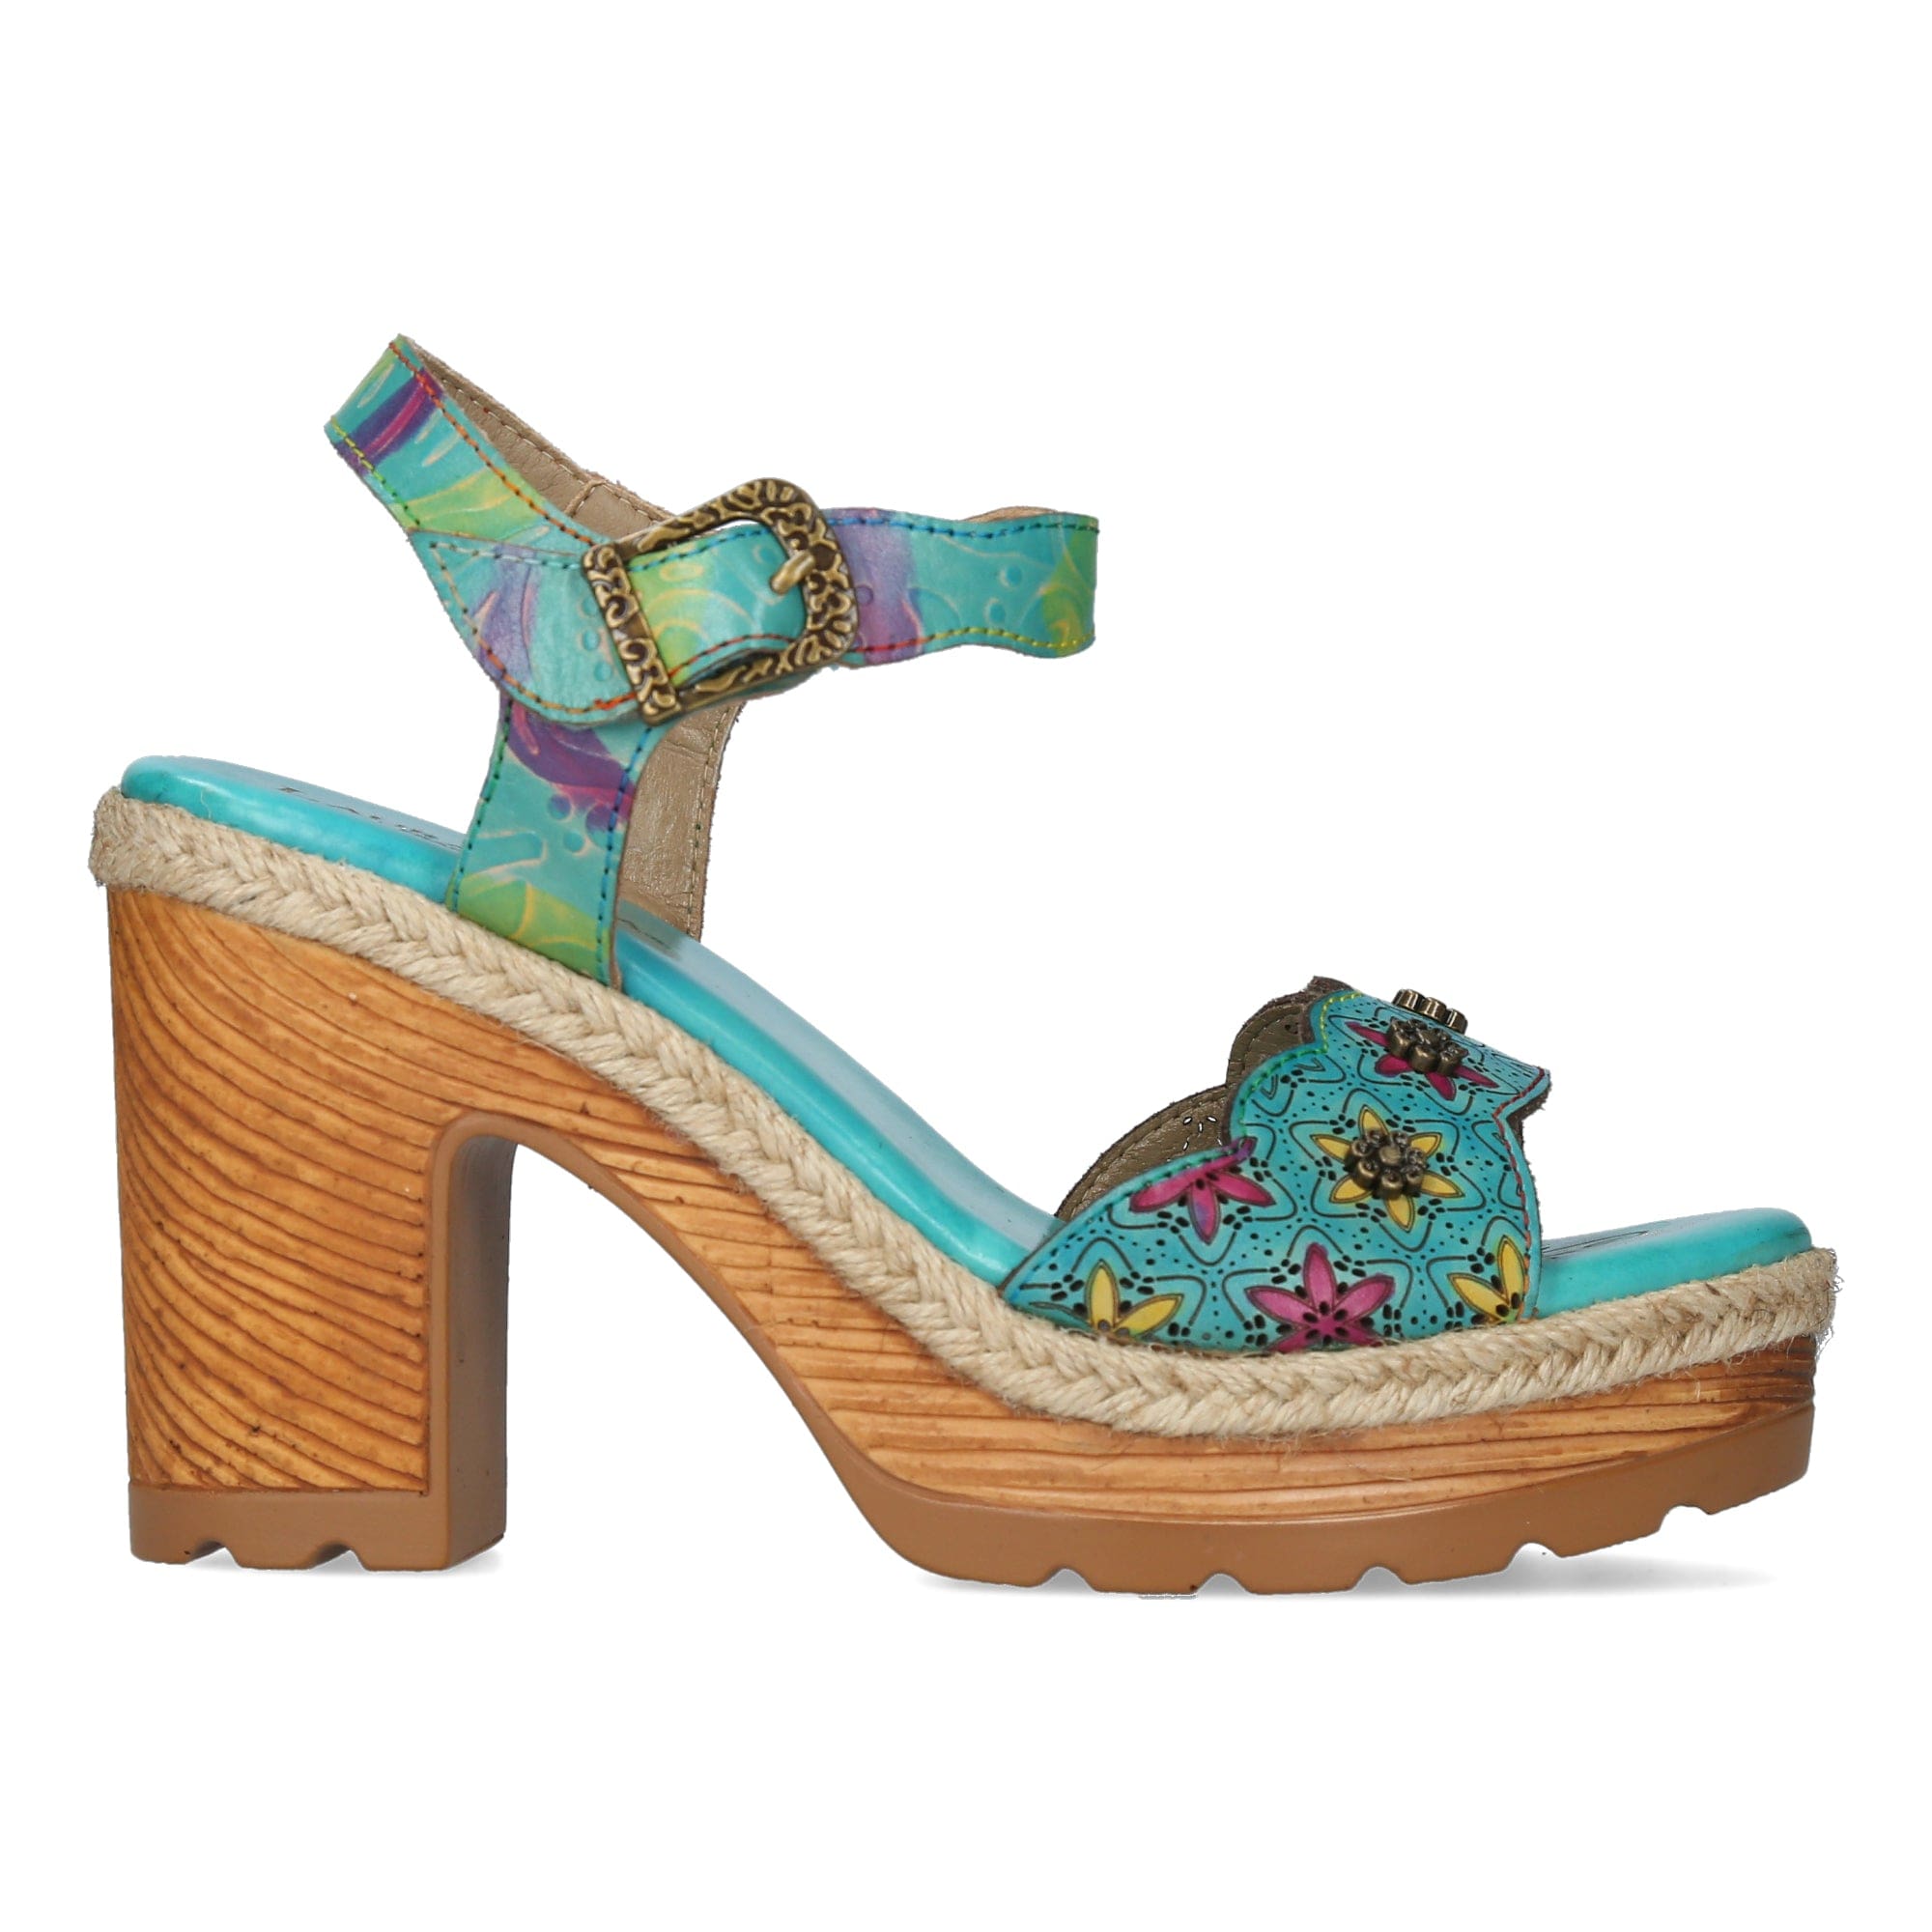 Chaussures JACAO 10 - 35 / Turquoise - Sandale